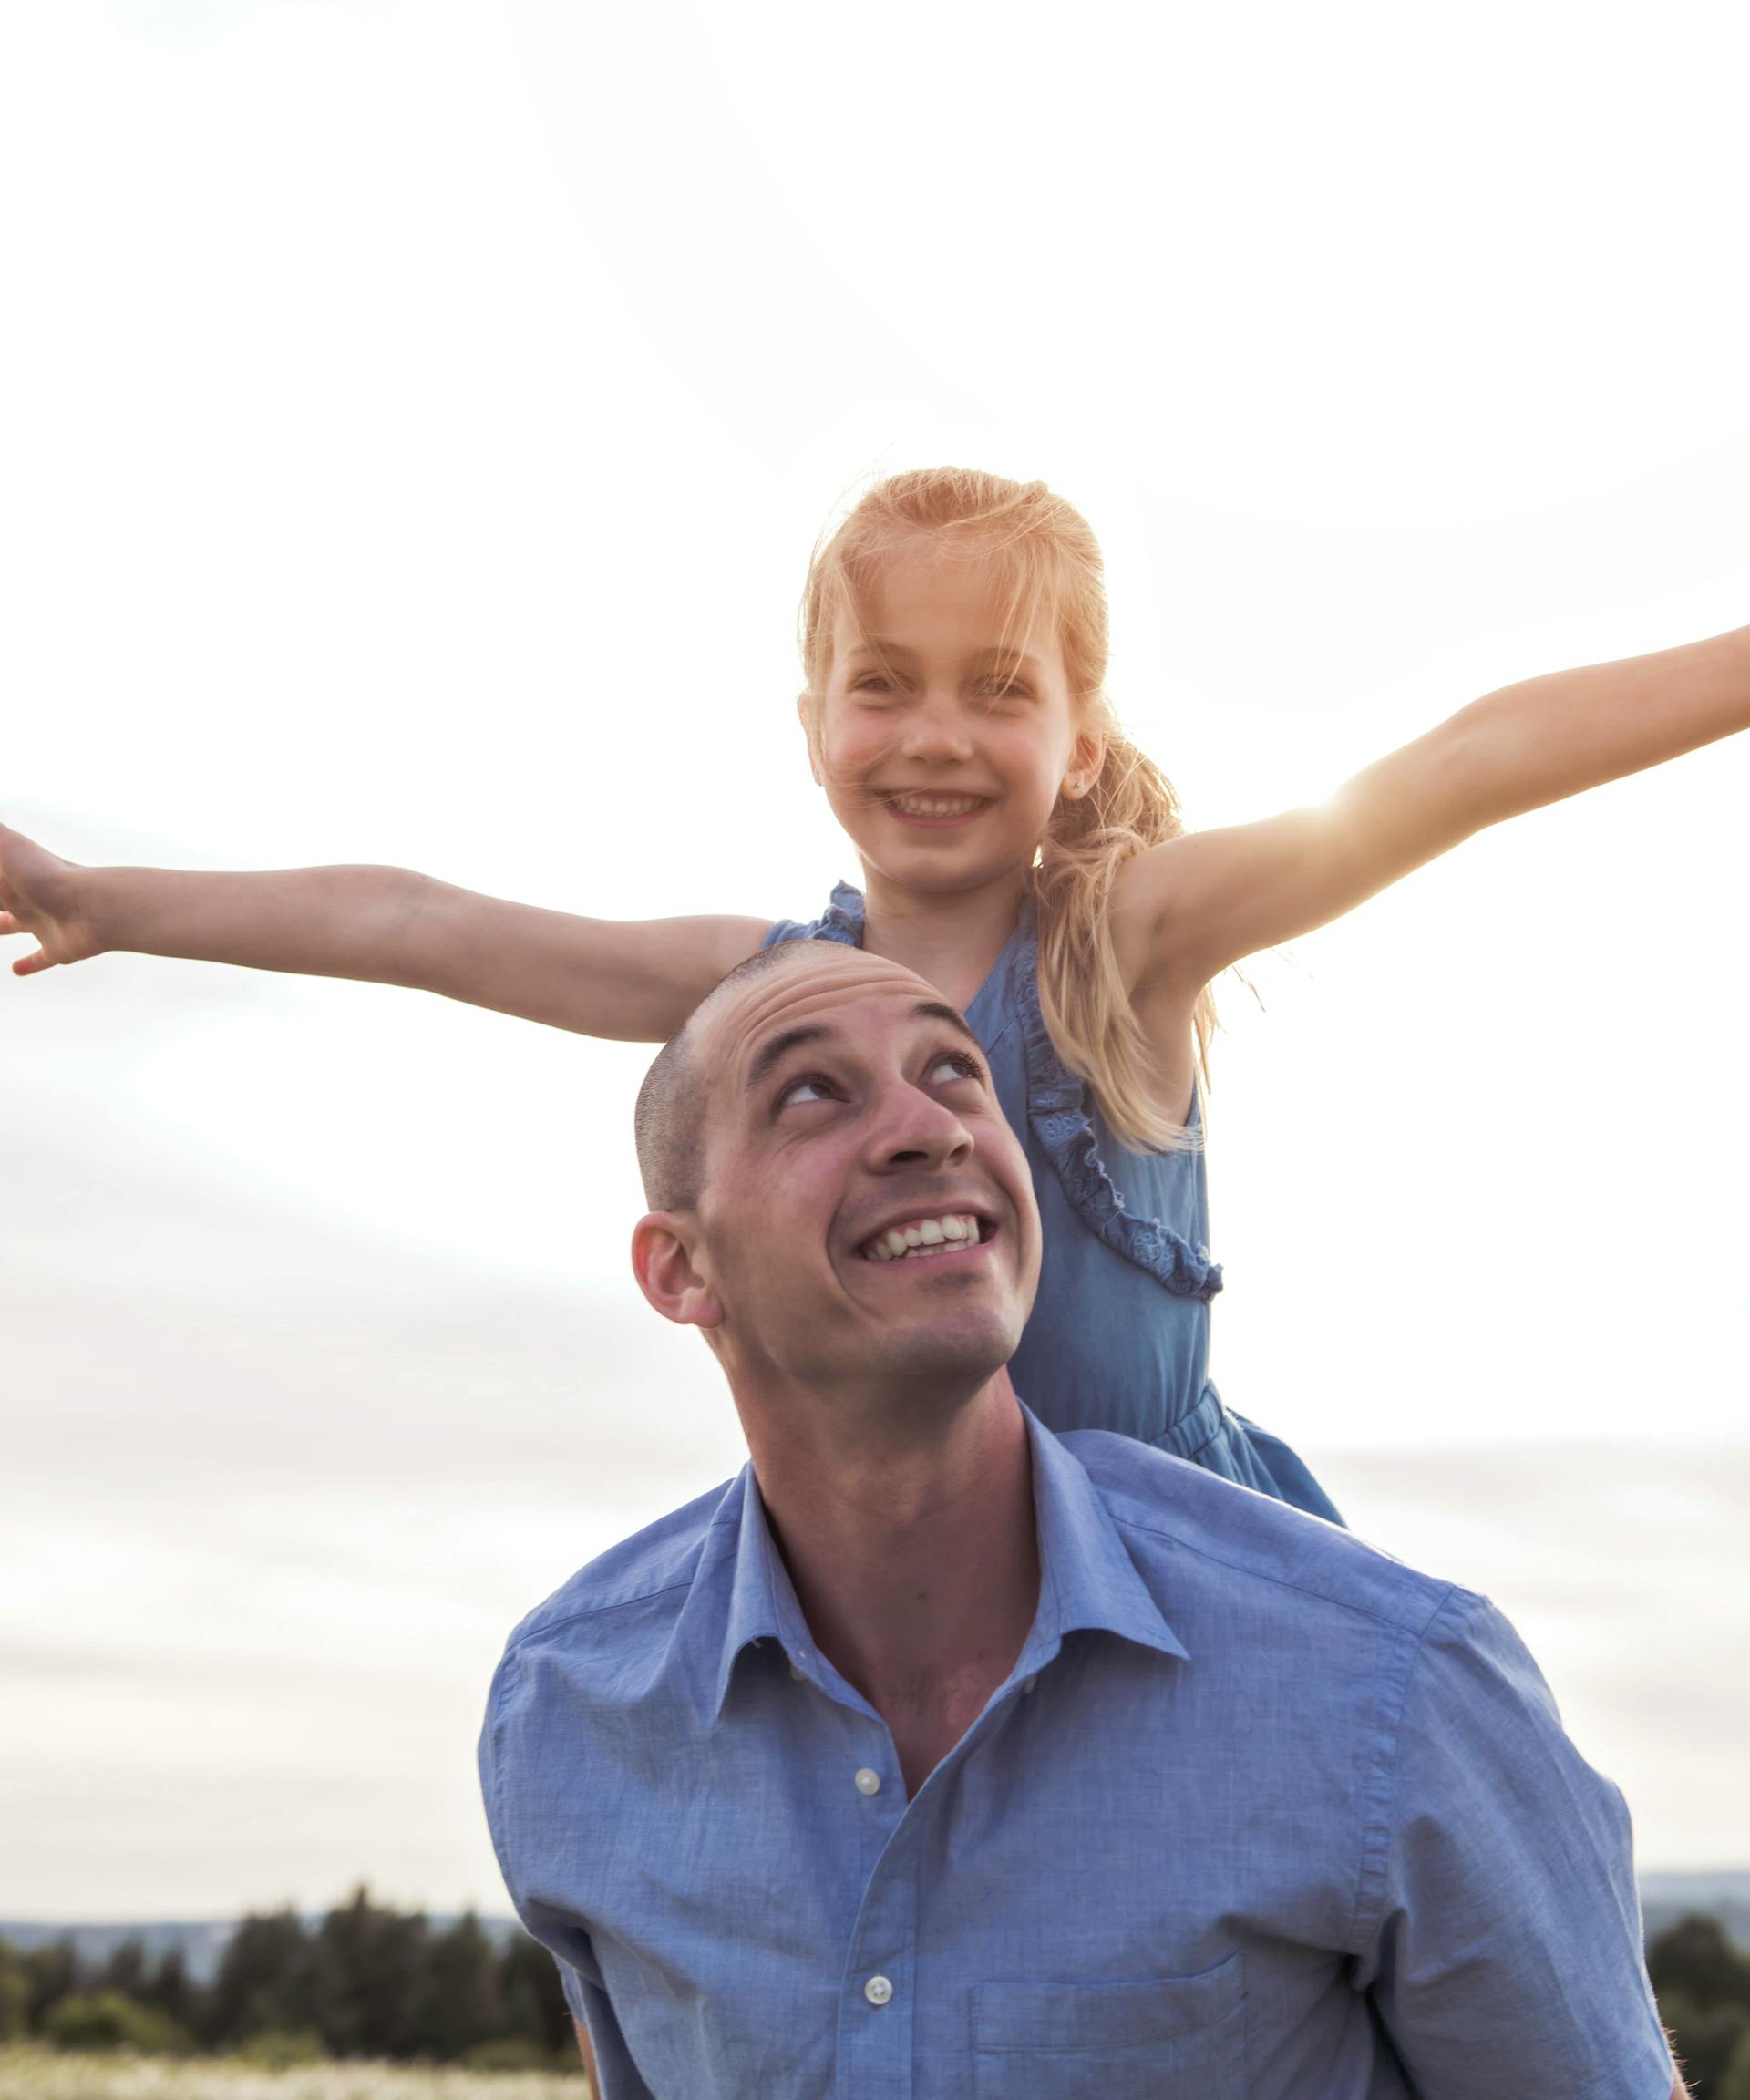 Fathers Are Important: The Intact Family Enjoys The Best Outcomes